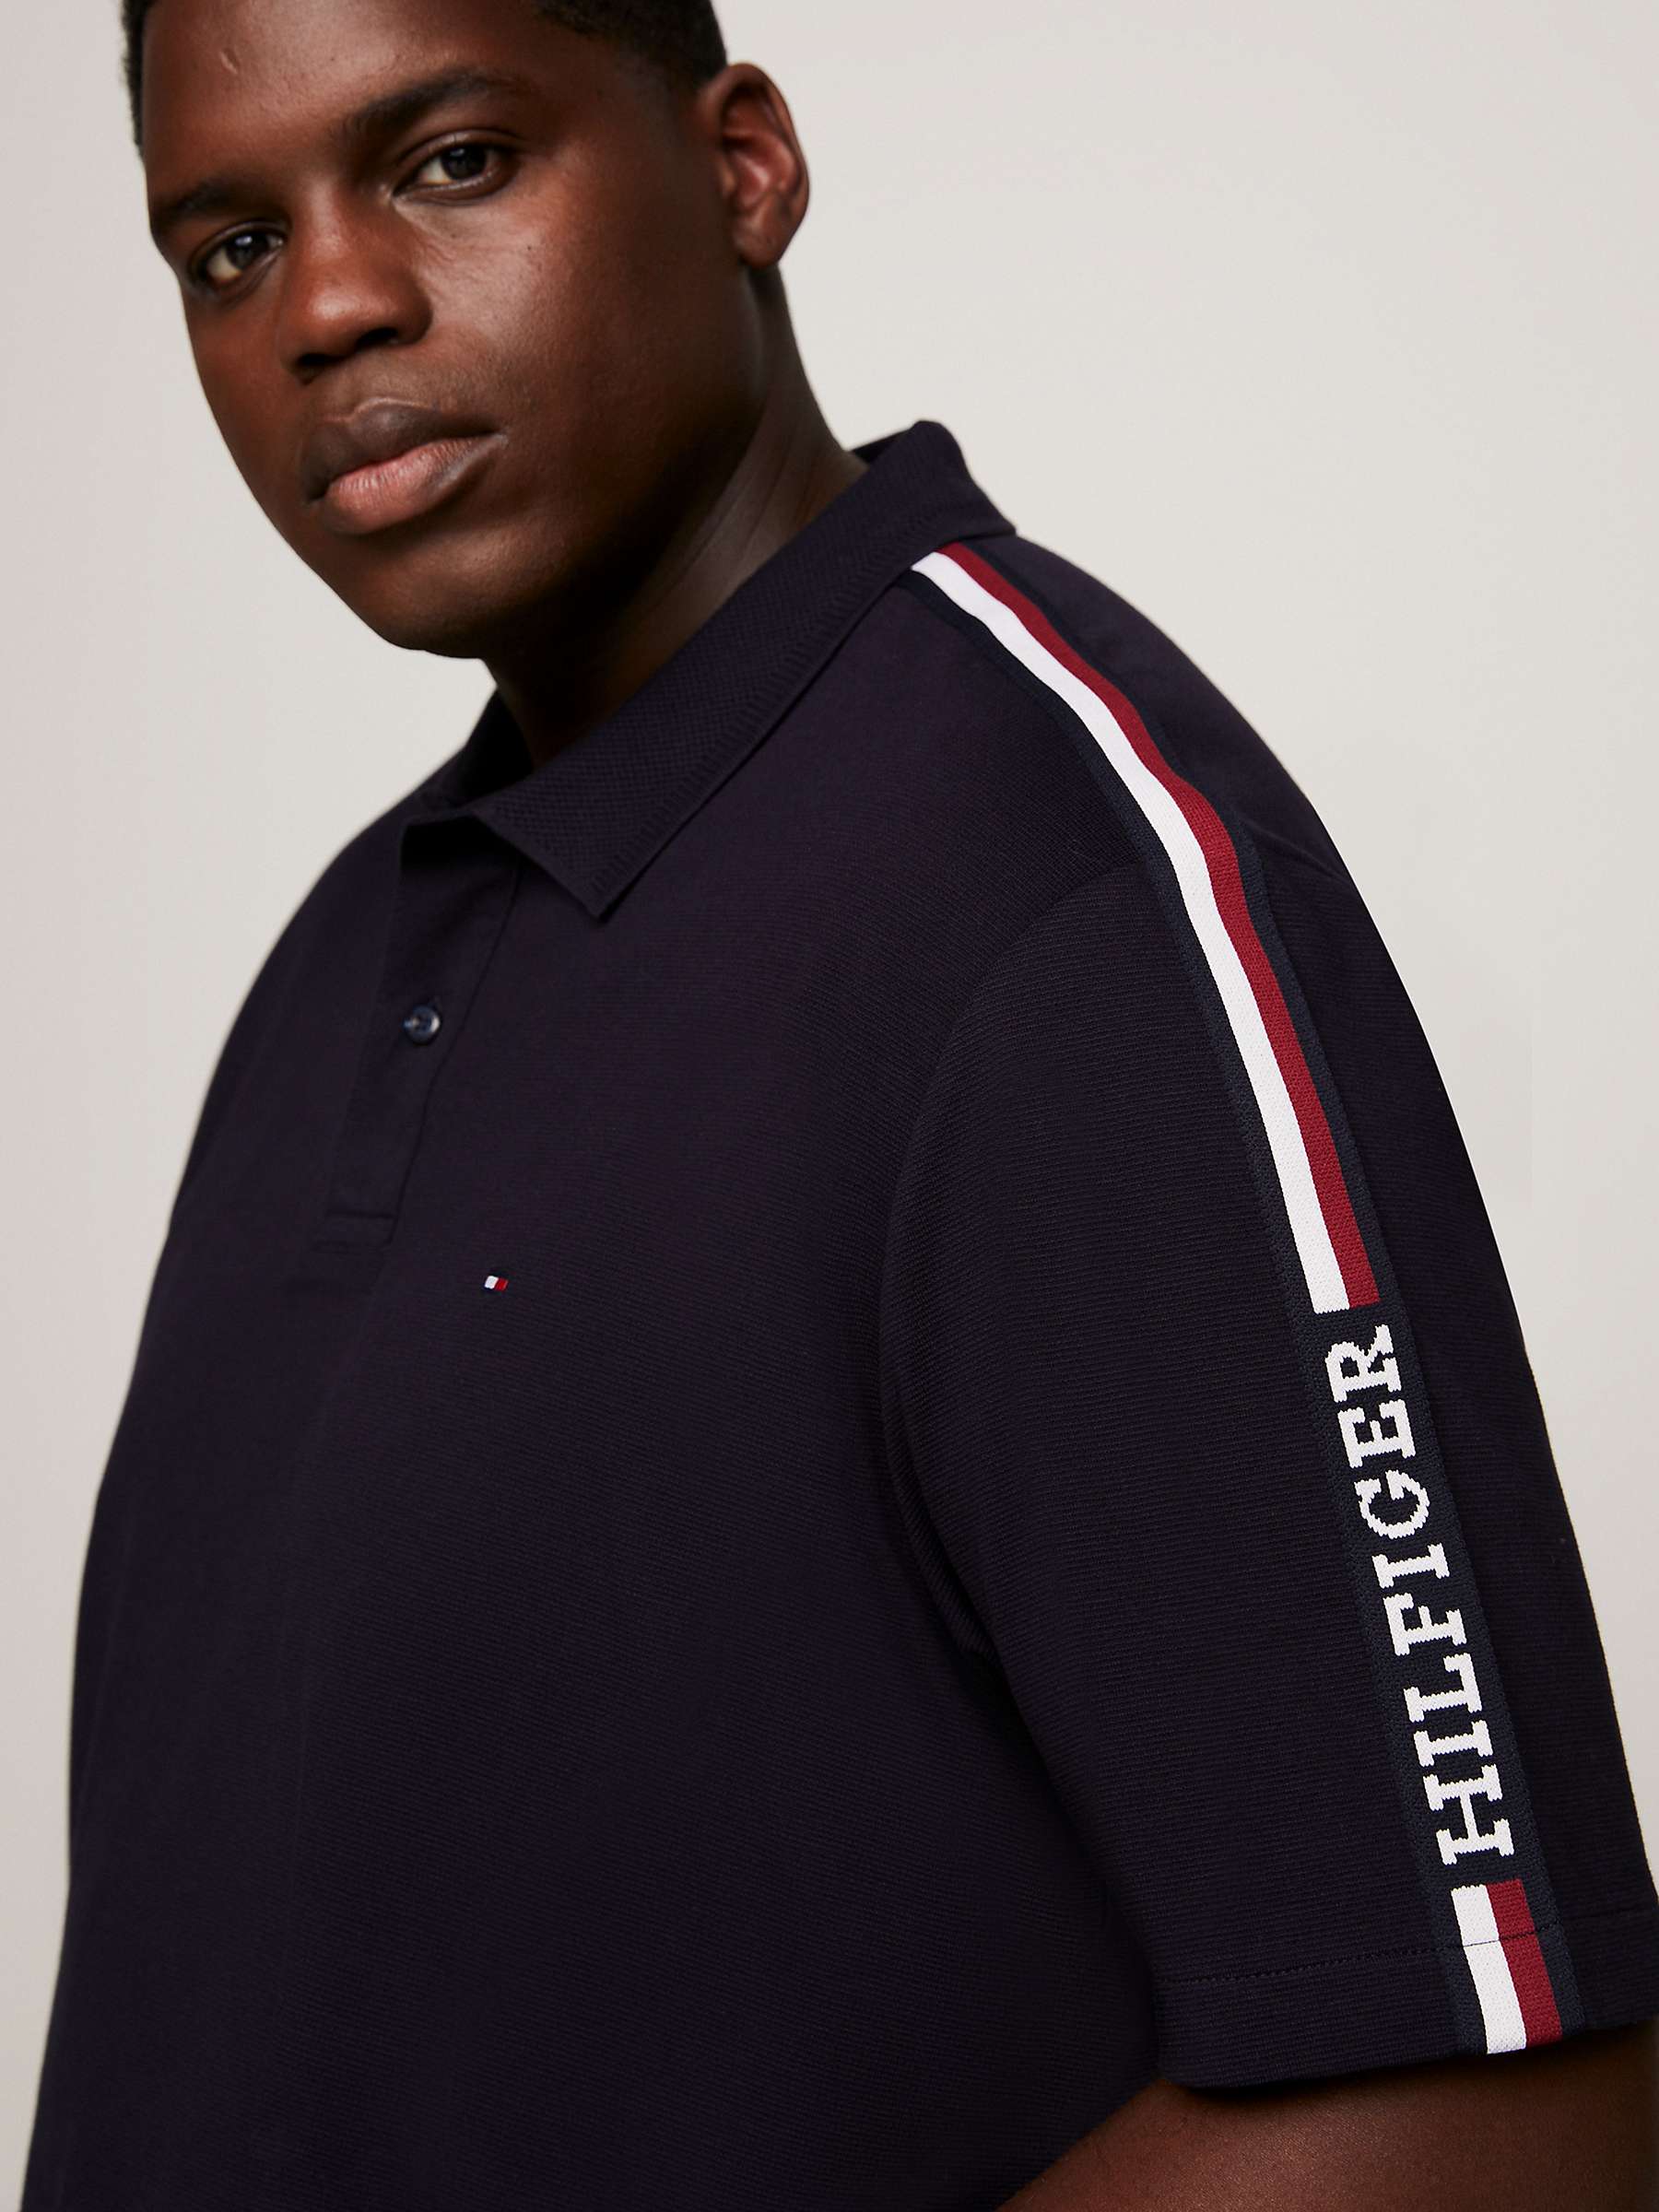 Buy Tommy Hilfiger B&T Global Monotype Polo Top, Navy Online at johnlewis.com